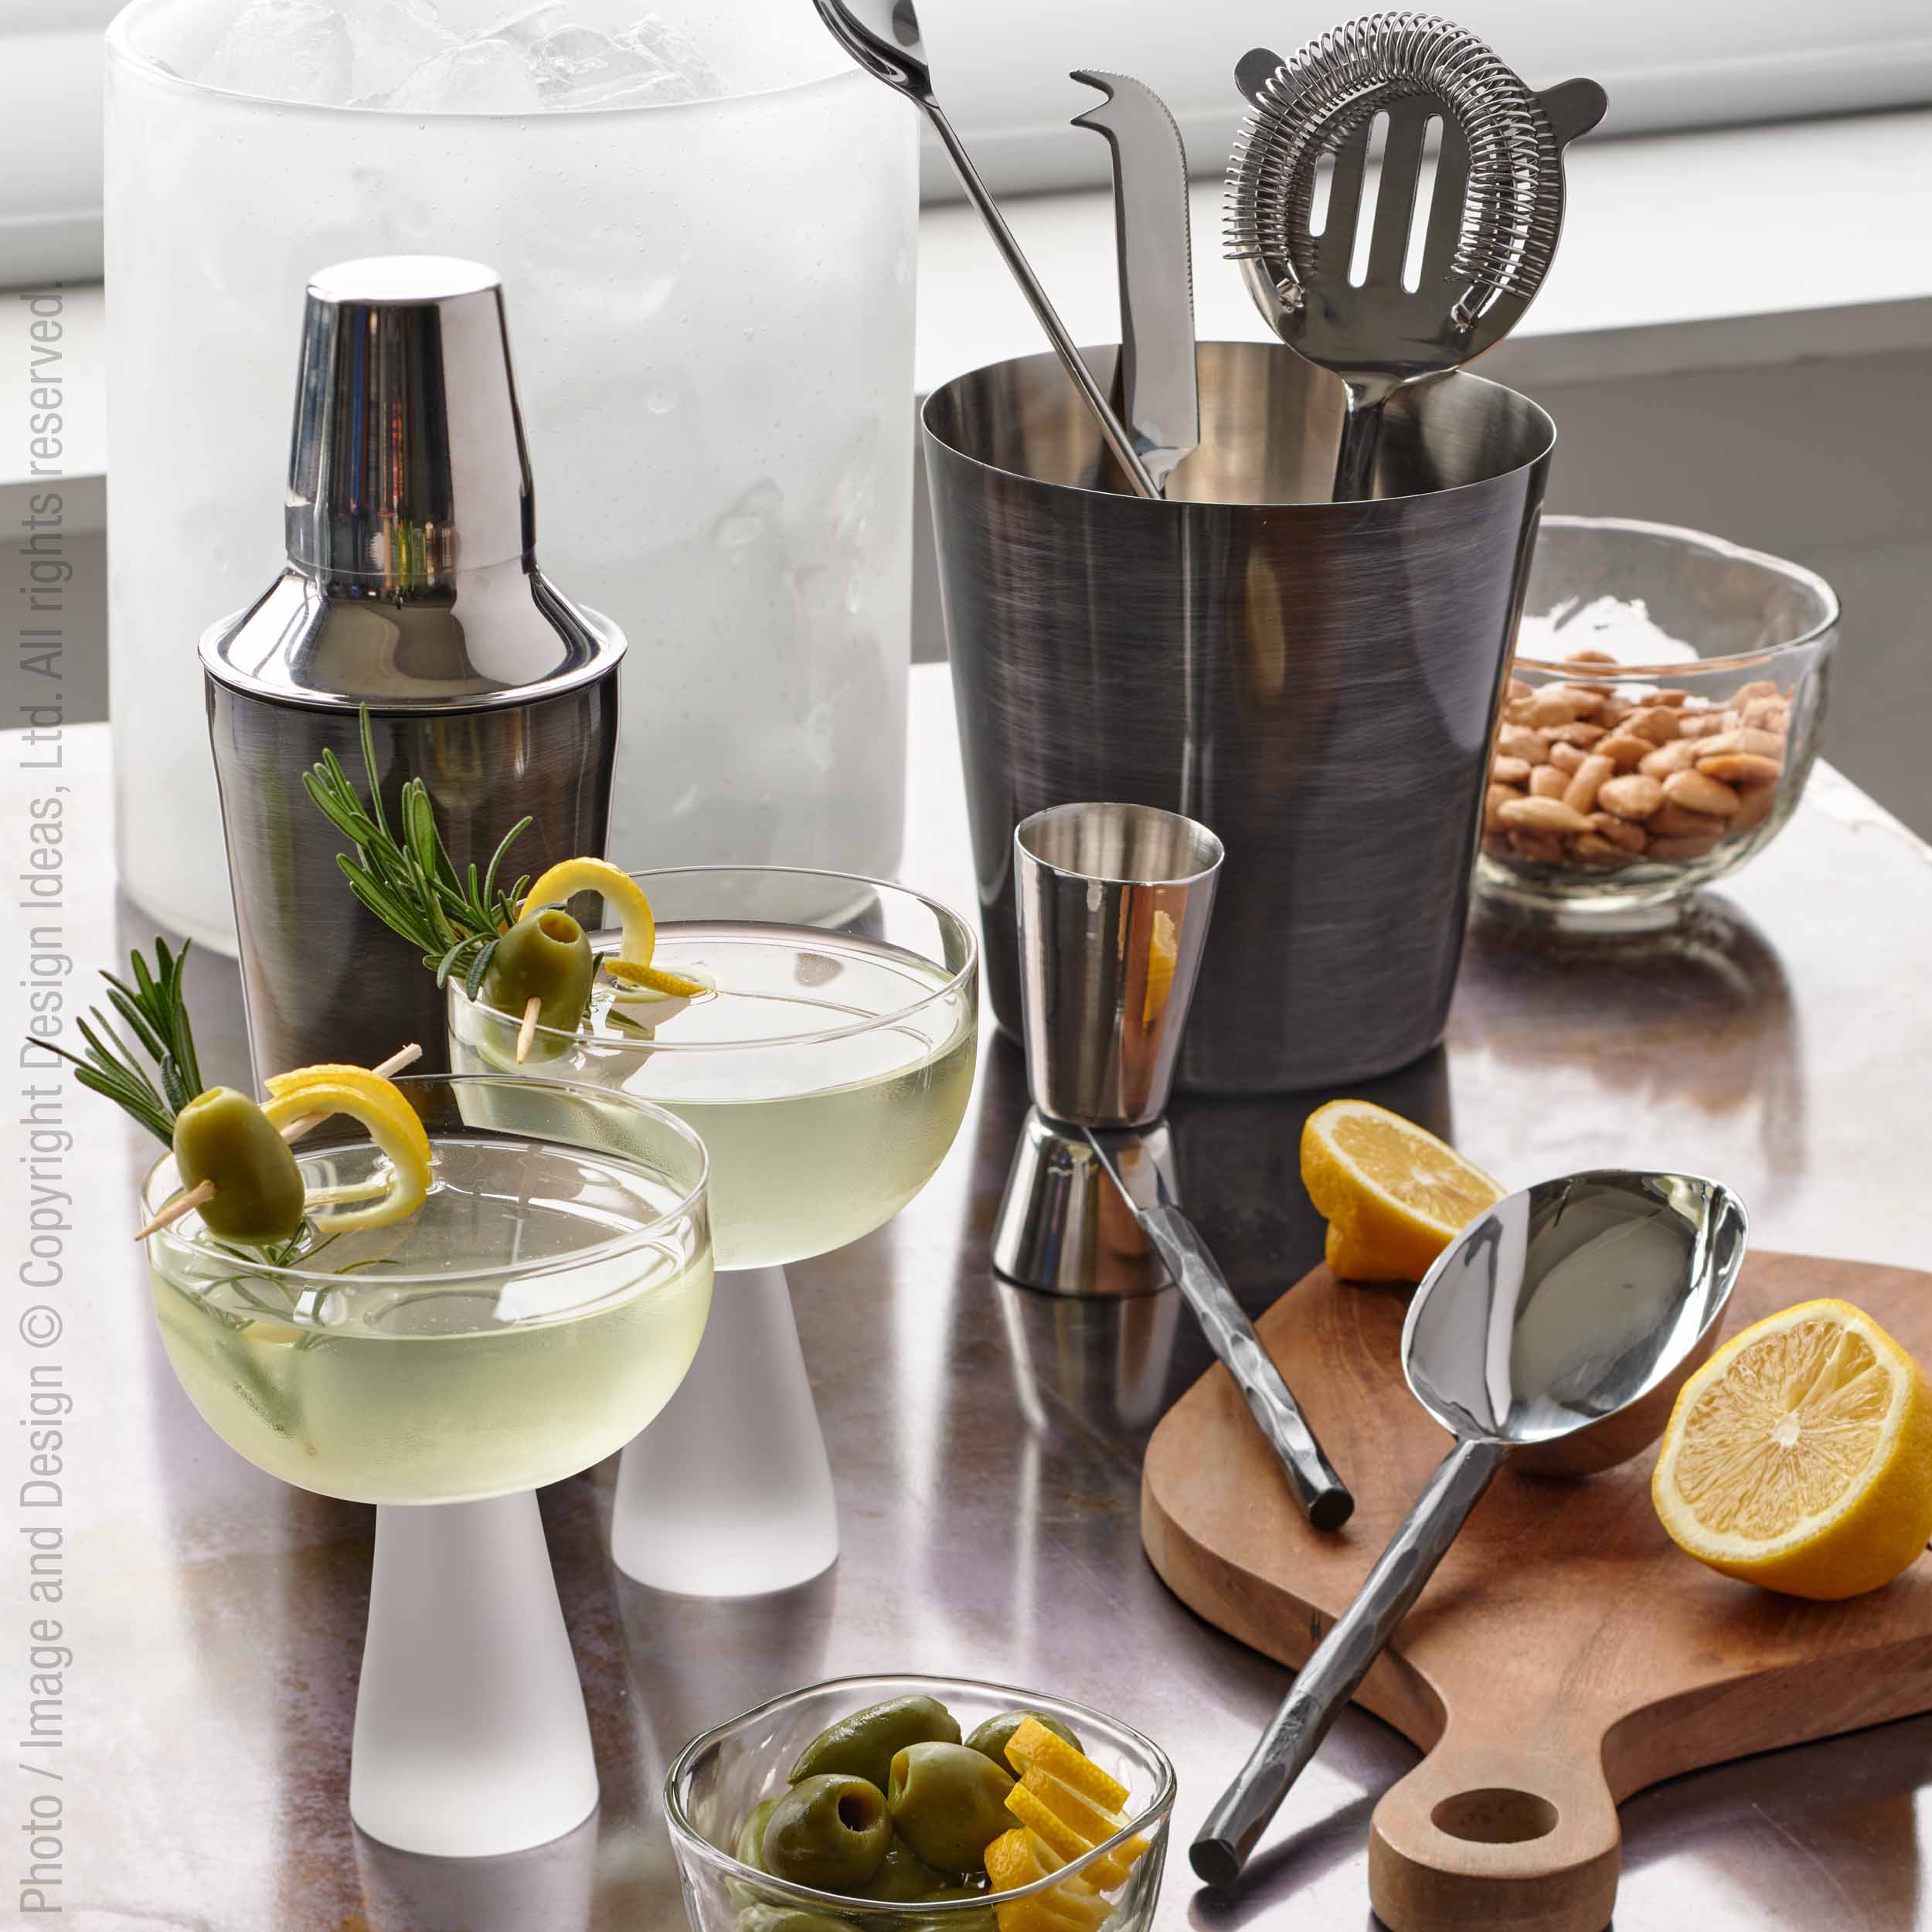 Tomini™ barware (set of 3) - Silver | Image 2 | Premium Utensils from the Tomini collection | made with Stainless Steel for long lasting use | texxture